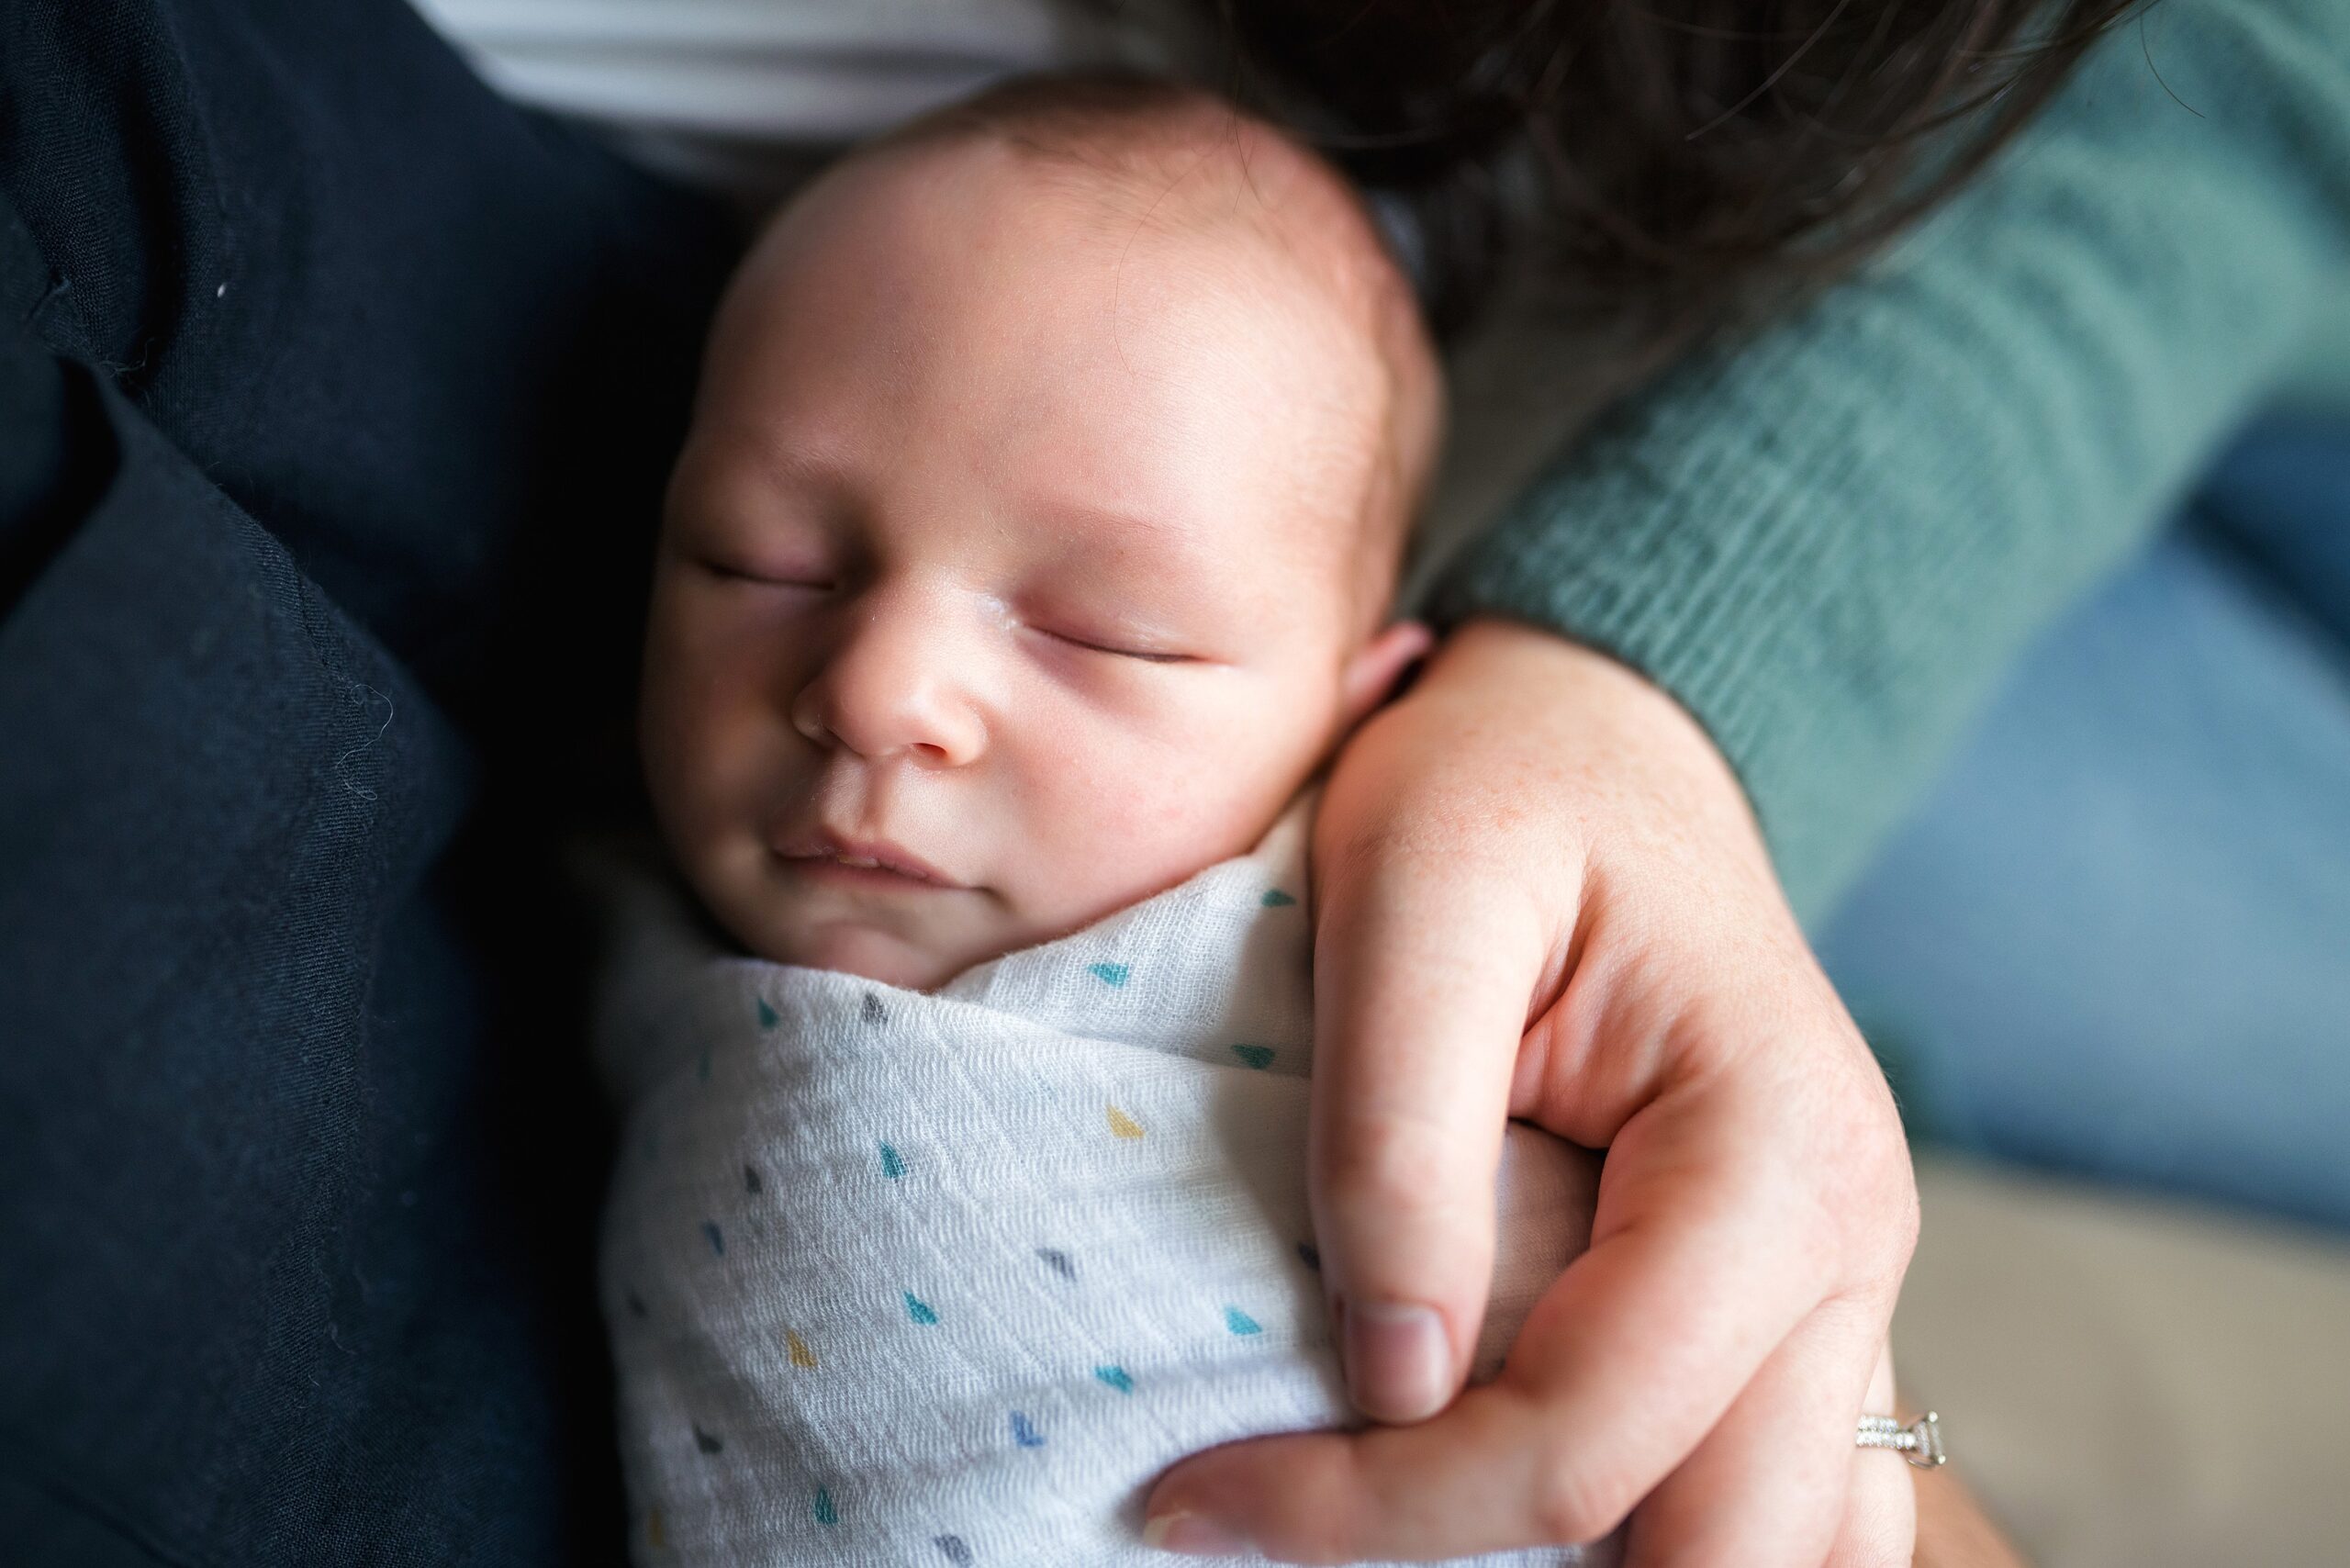 Swaddled newborn baby in parents arms during in home newborn photo session